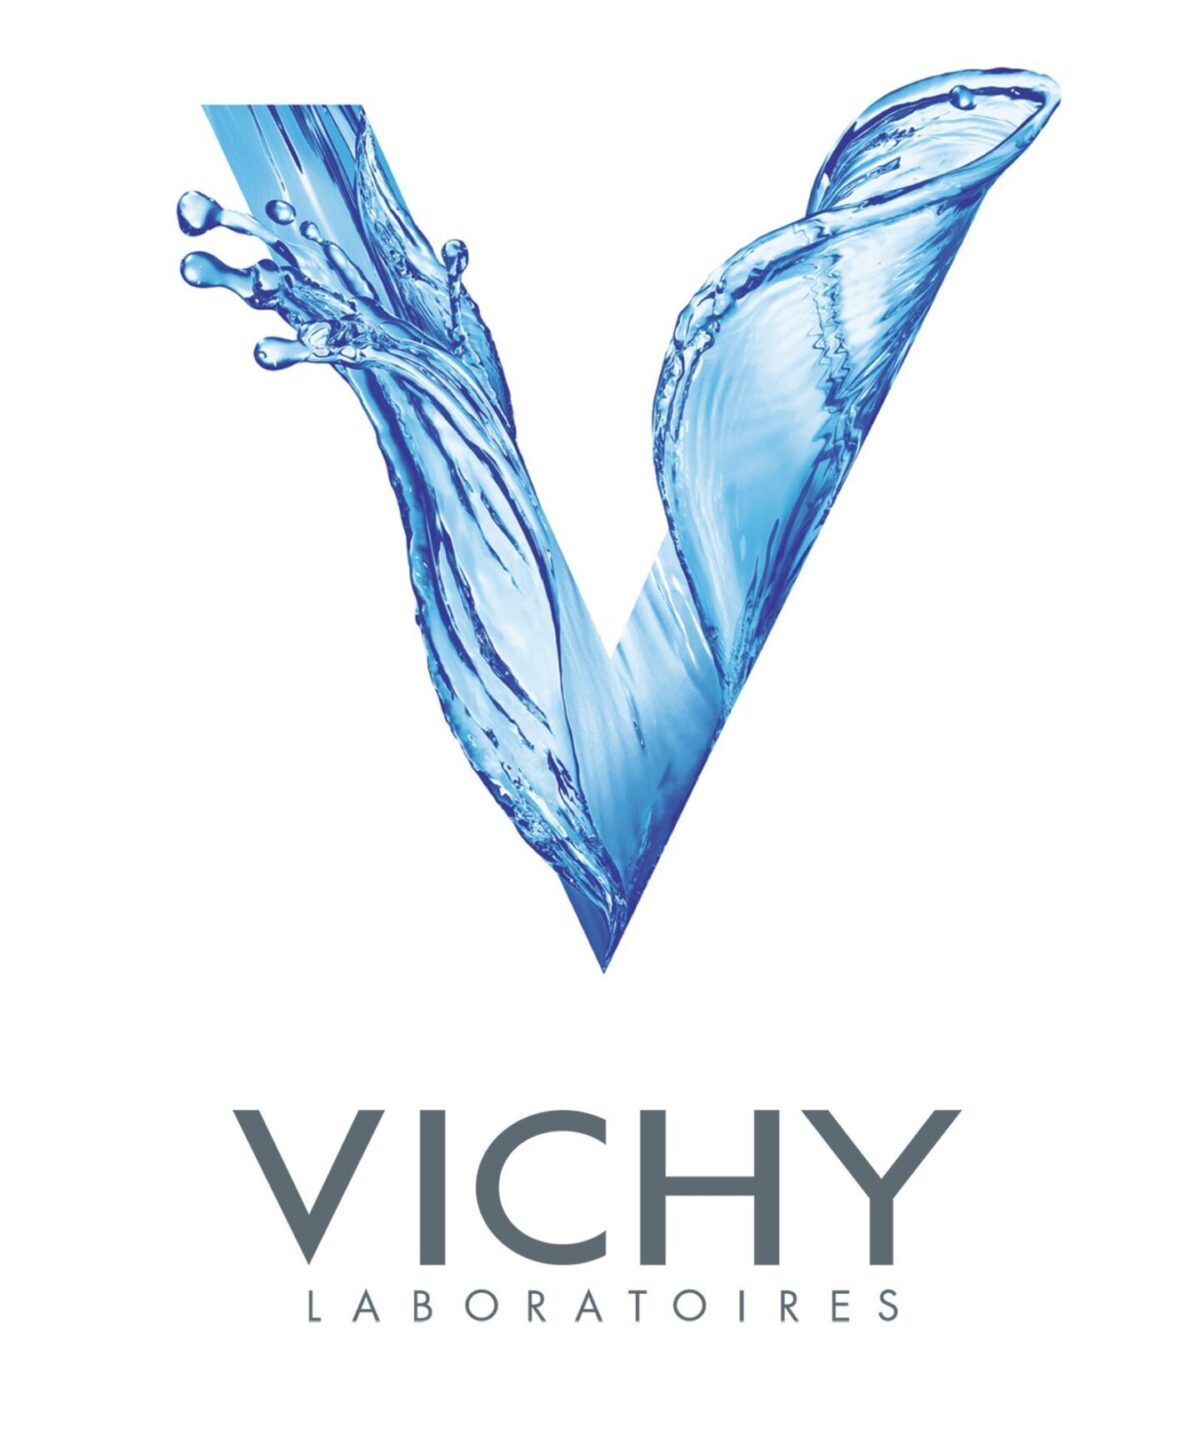 Review Dưỡng Chất Vichy Mineral 89 Booster 28